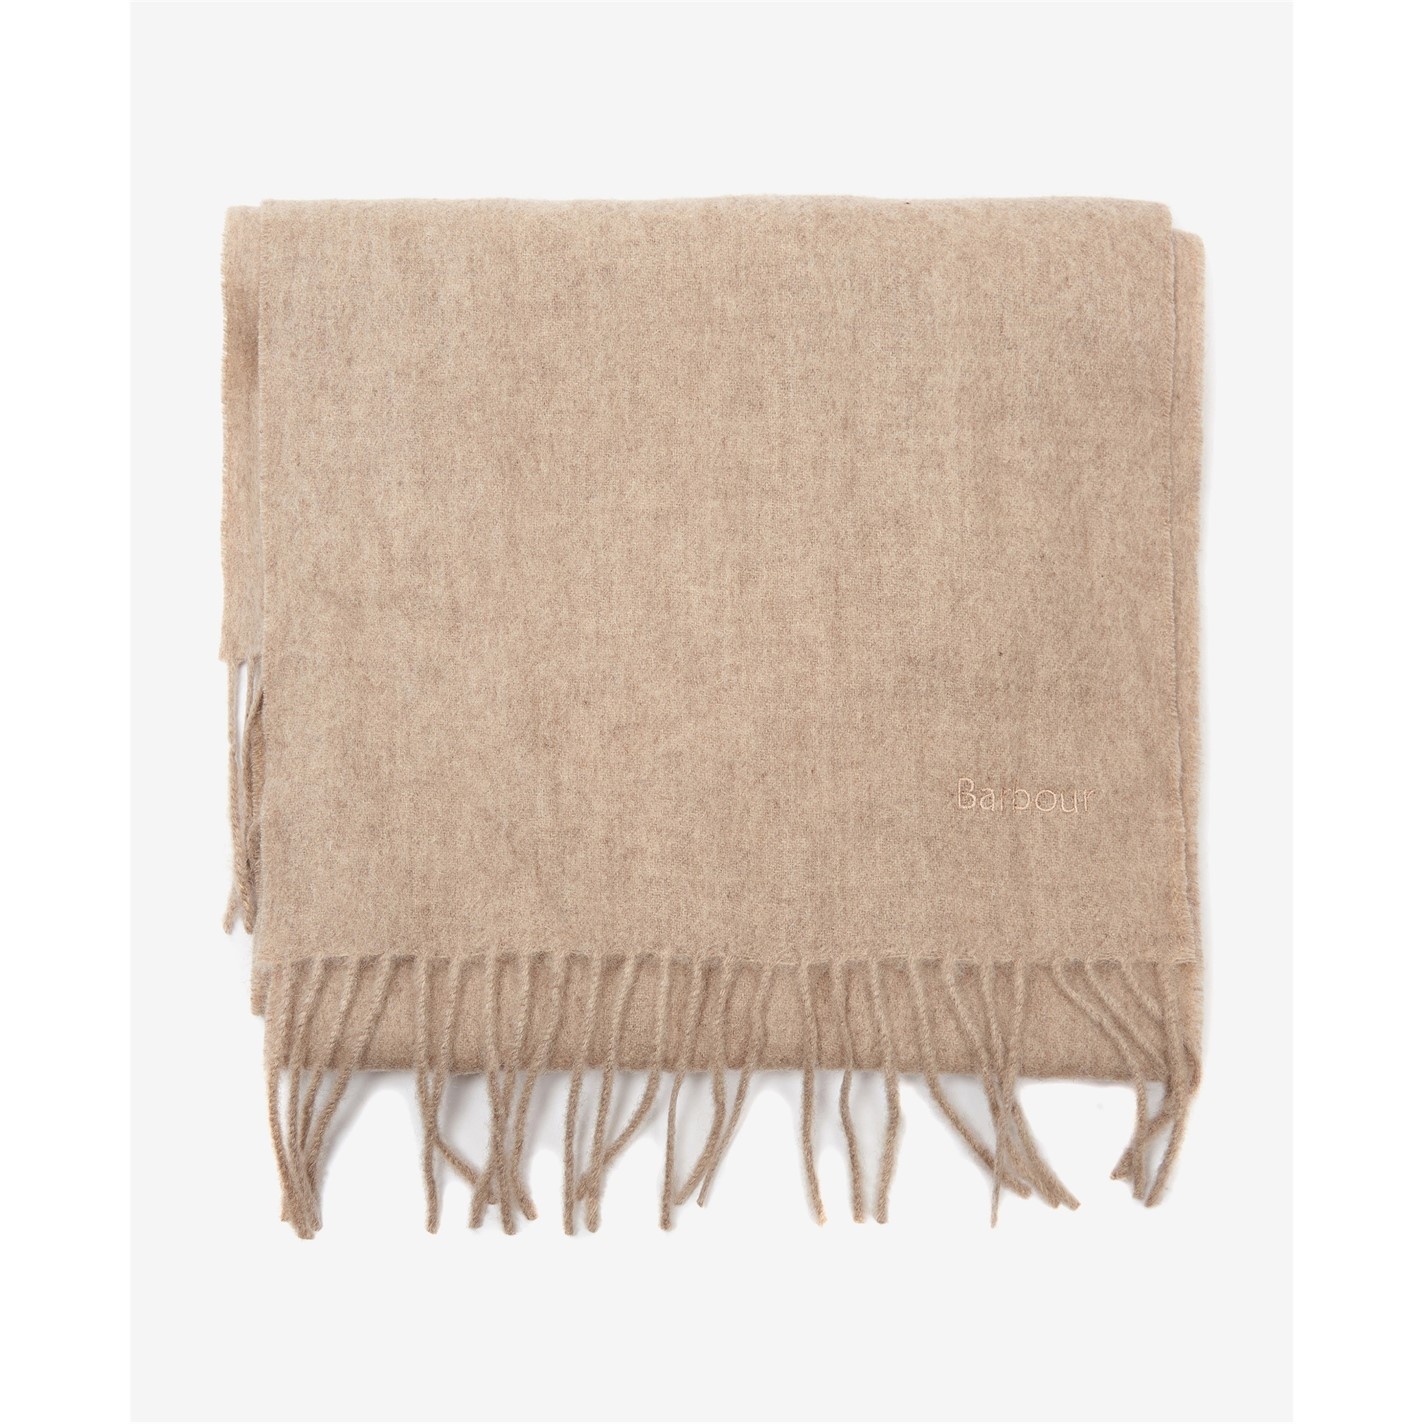 Barbour LAMBSWOOL WOVEN SCARF | REVERSIBLE